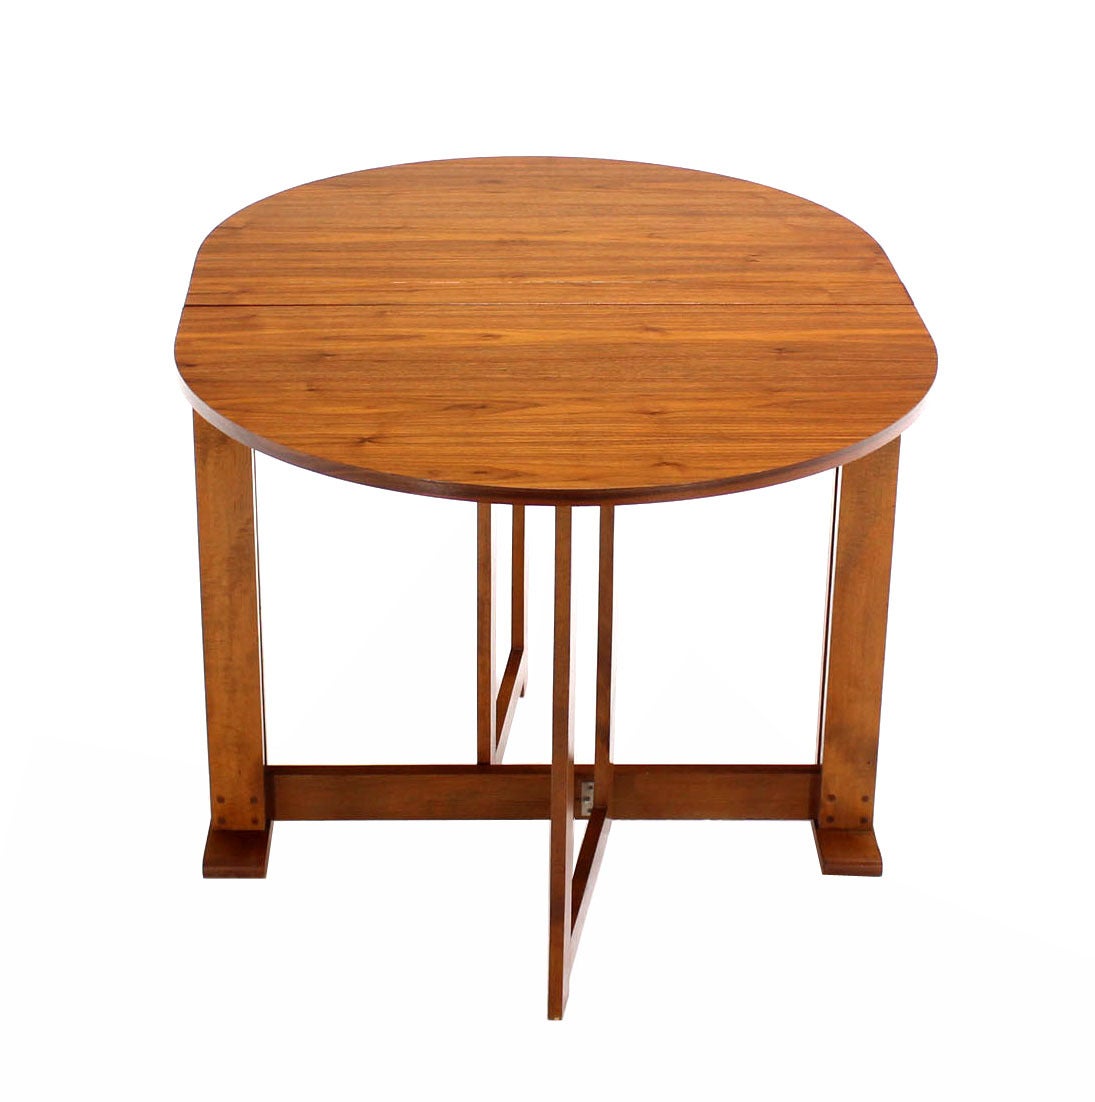 Lacquered Danish Mid-Century Modern Walnut Drop-Leaf Dining or Breakfast Table